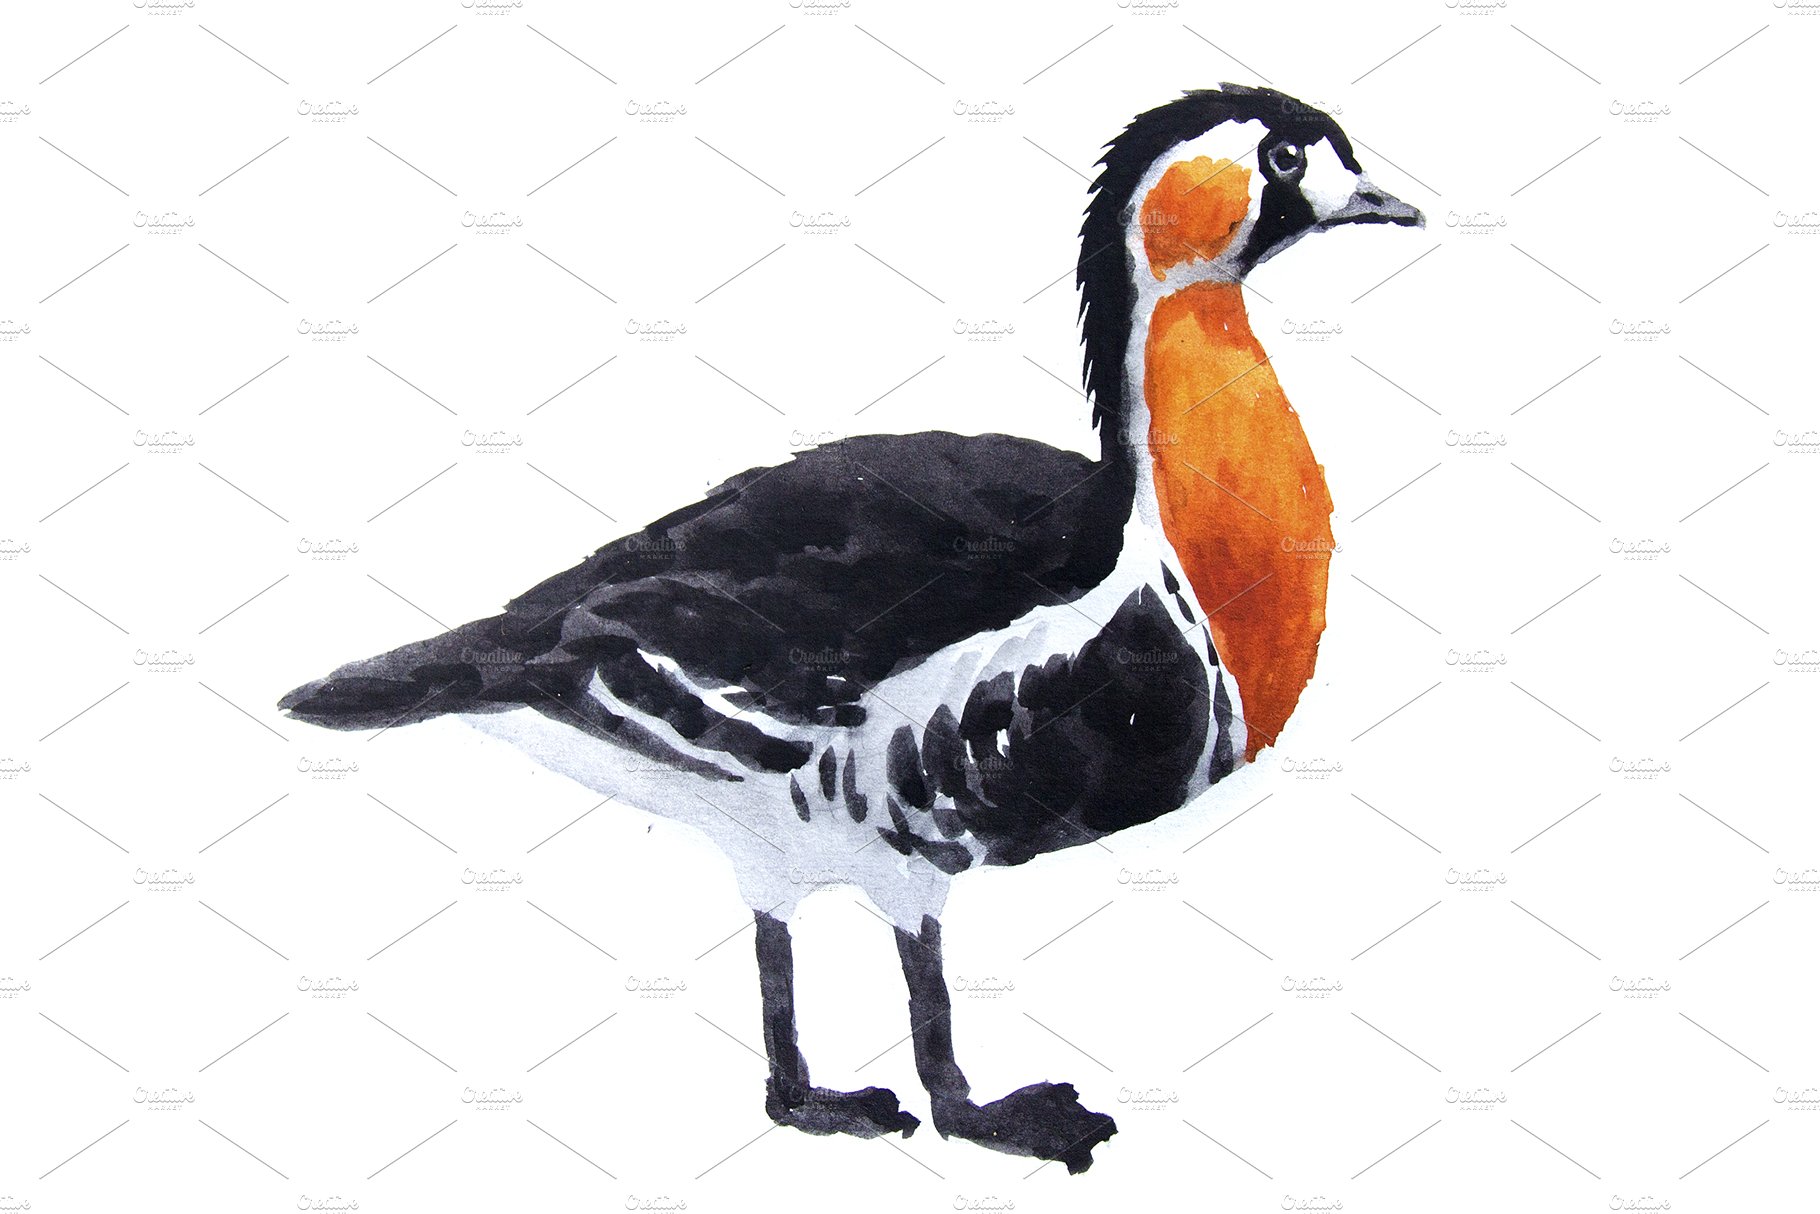 Watercolor brent goose cover image.